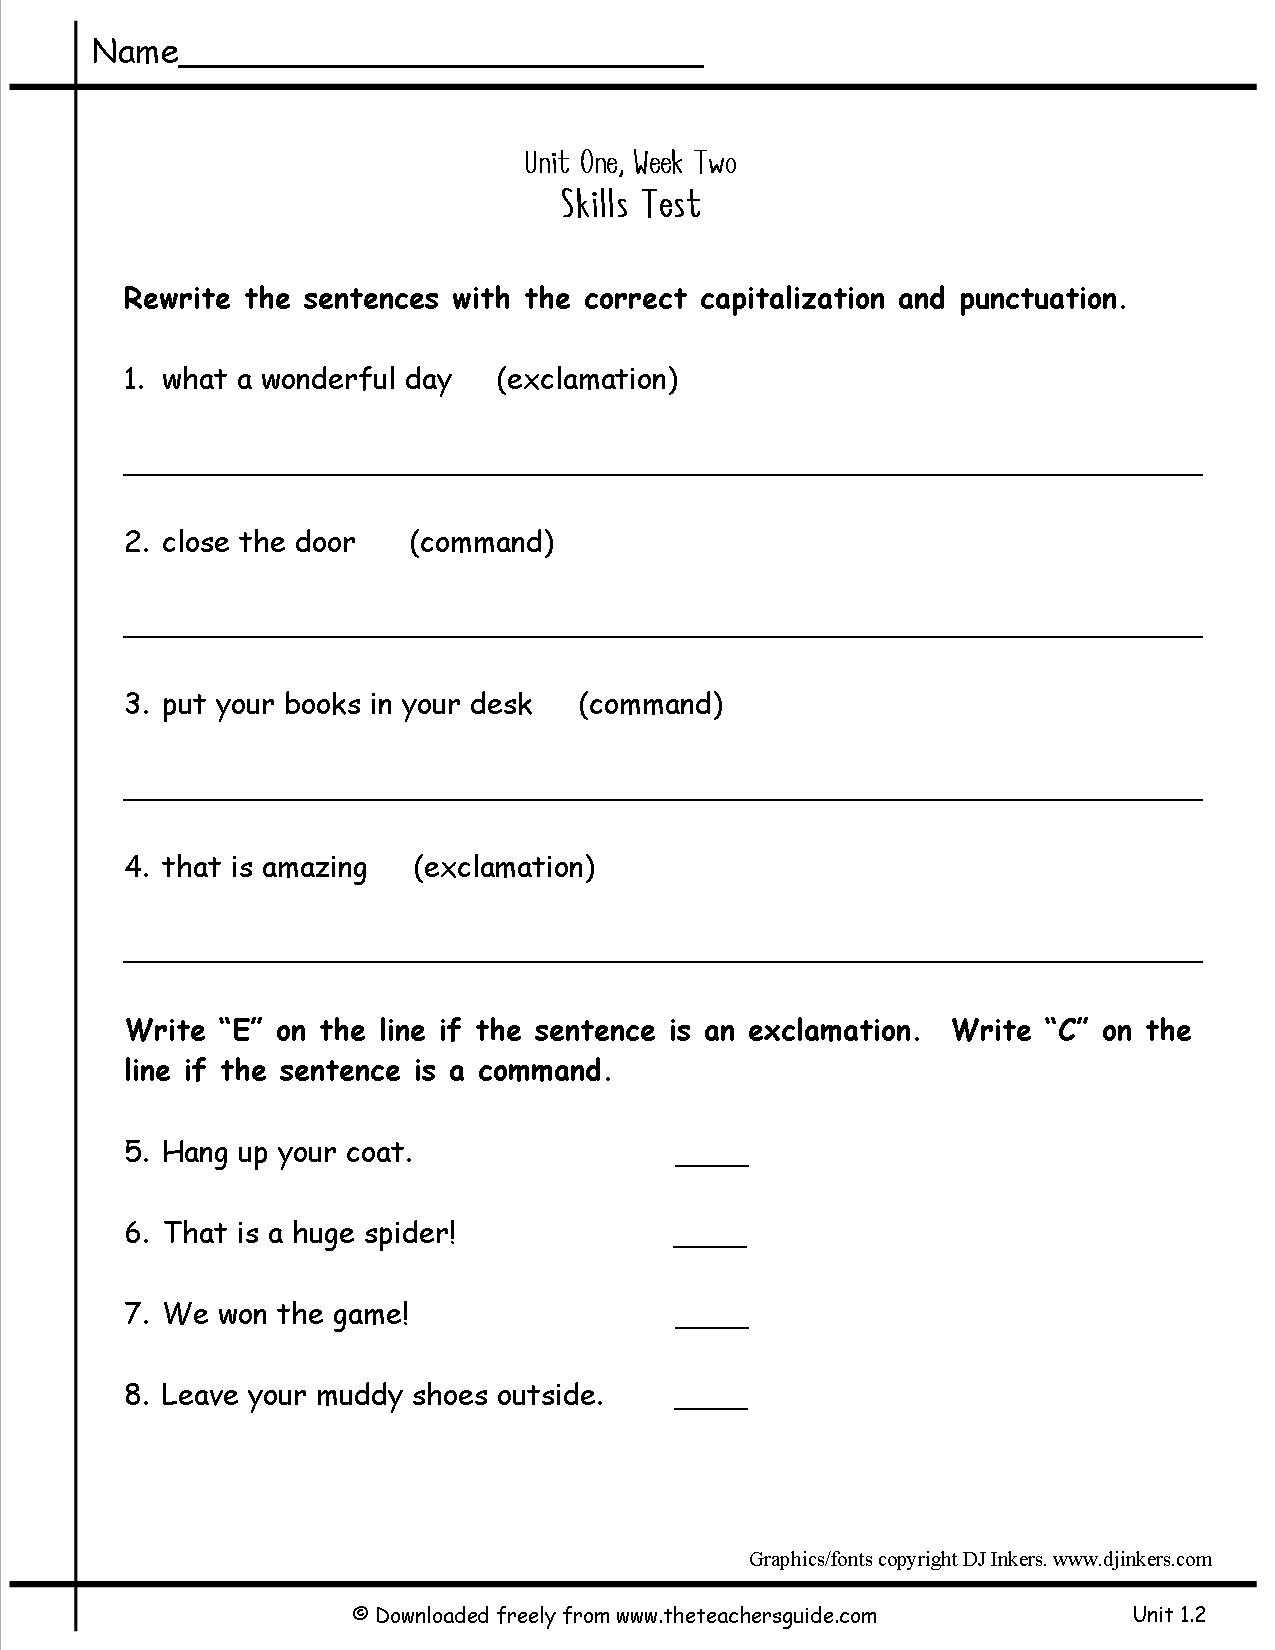 Square Root Worksheets 8th Grade Pdf Along with Mands and Exclamation Worksheets the Best Worksheets Image